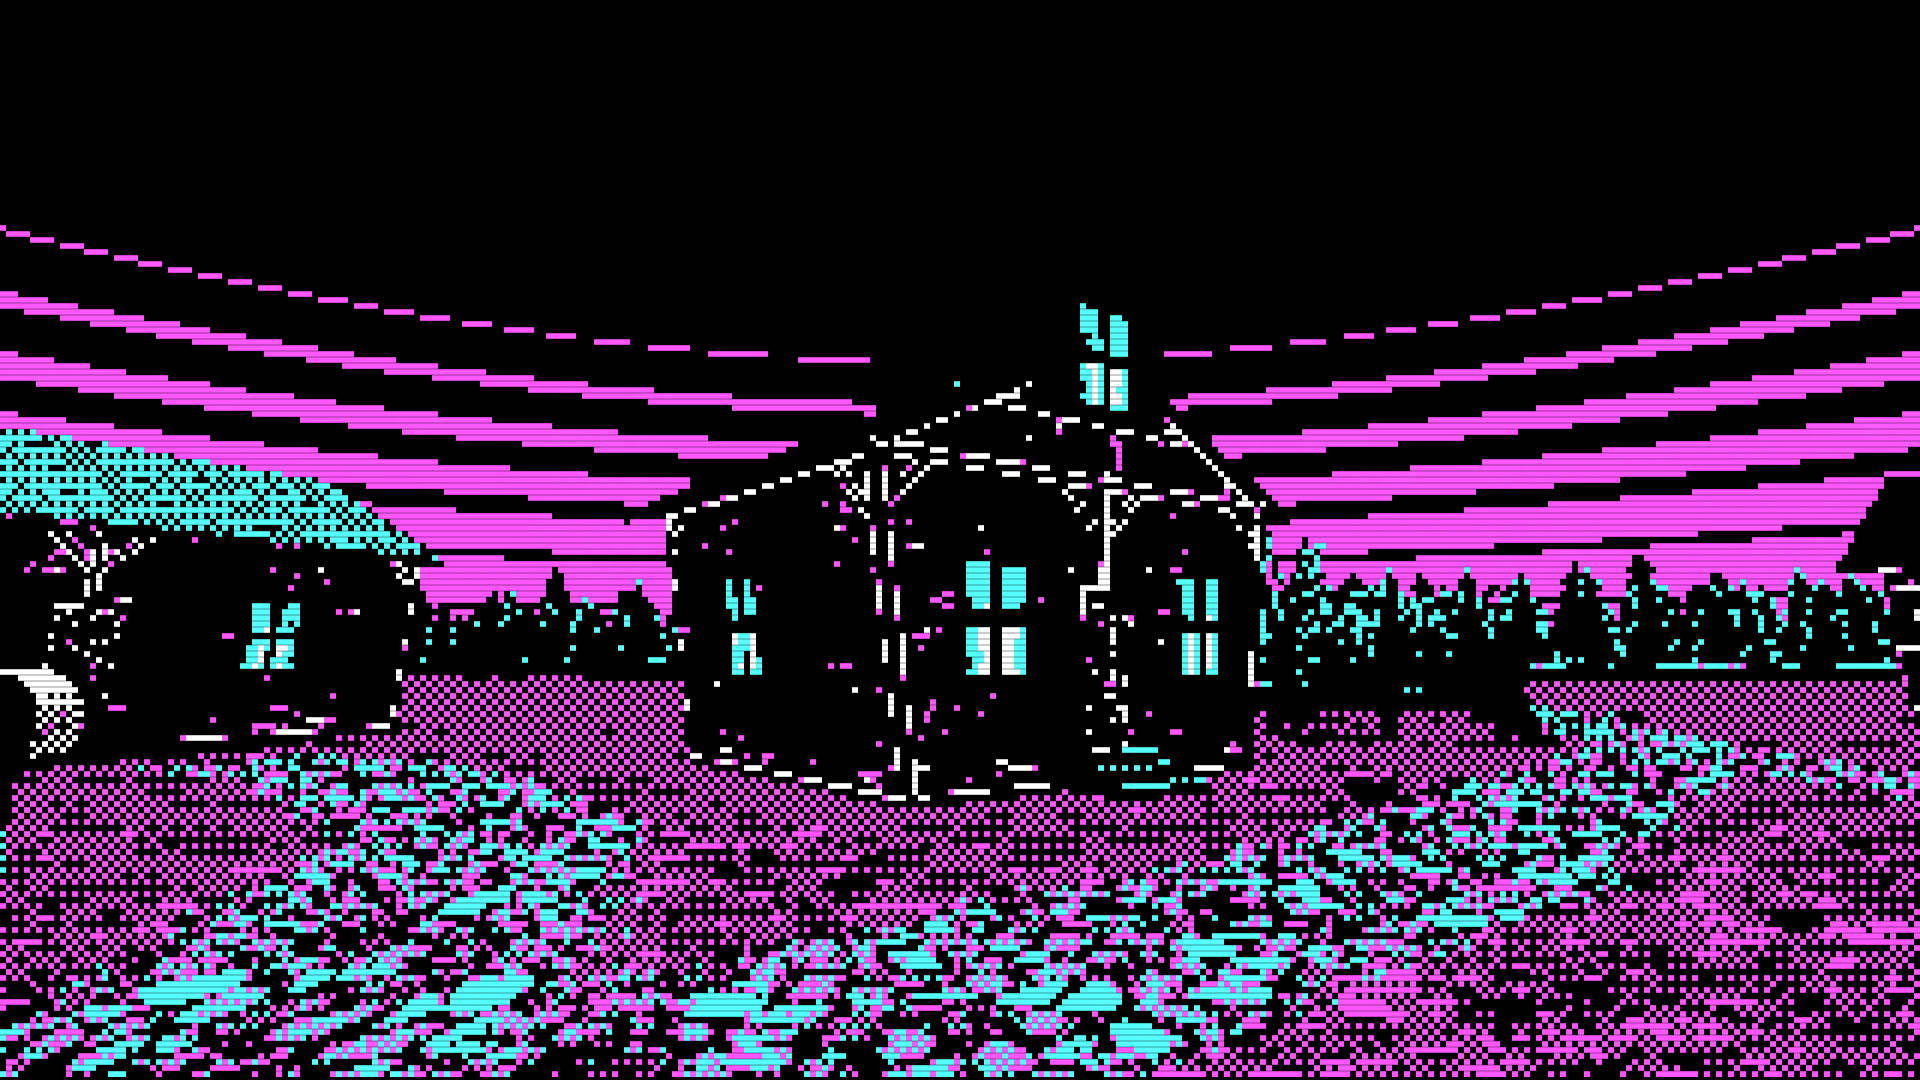 "Chill Out and Tune into the Future, with this Chill Vaporwave Pixel House" Wallpaper